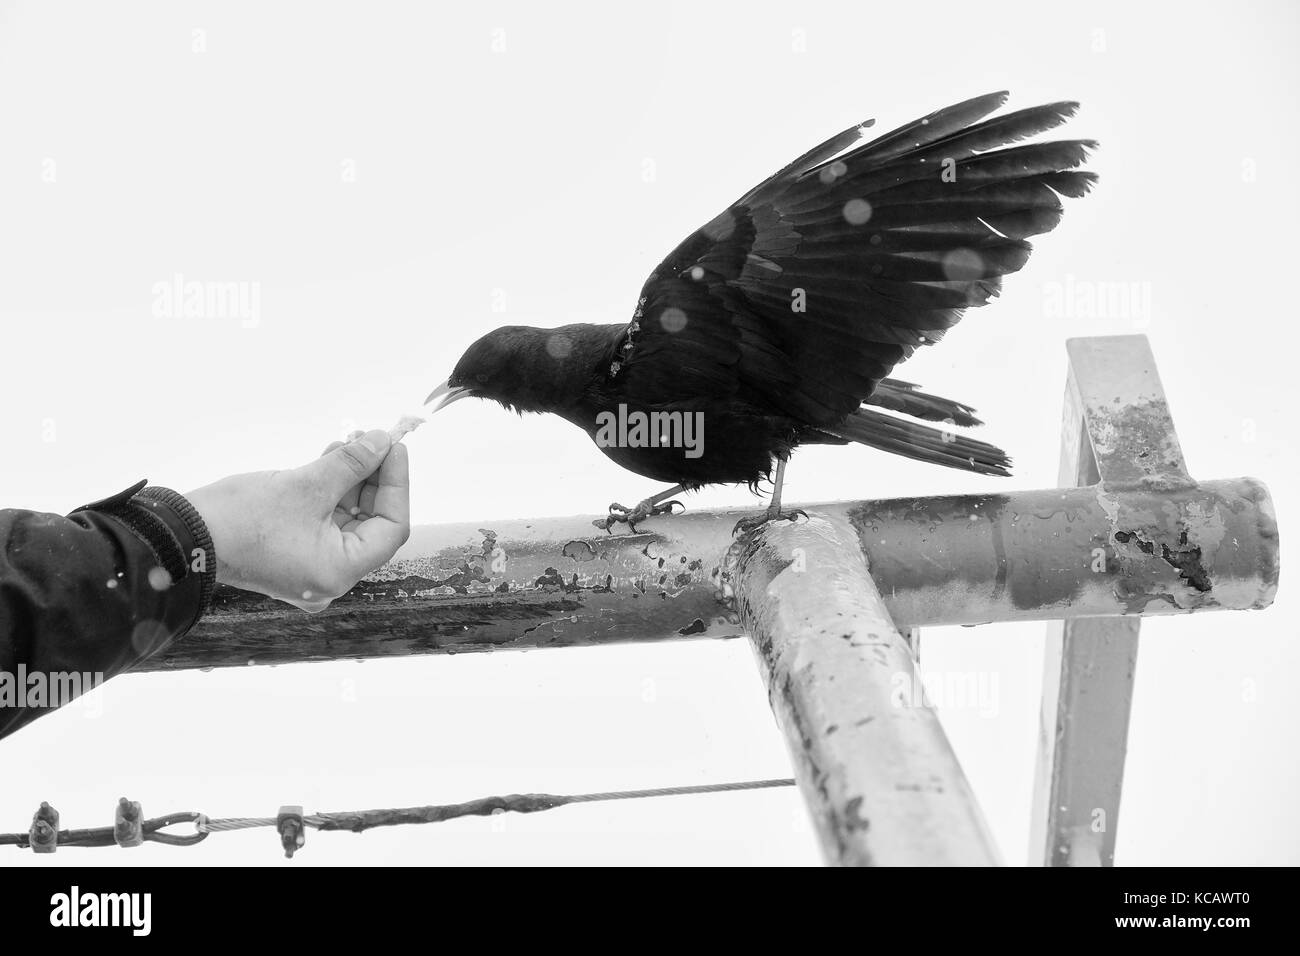 Black bird taking food. Feeding from hand. Hungry crow on handrail, misty cloud in background, fogy snowy day. Stock Photo